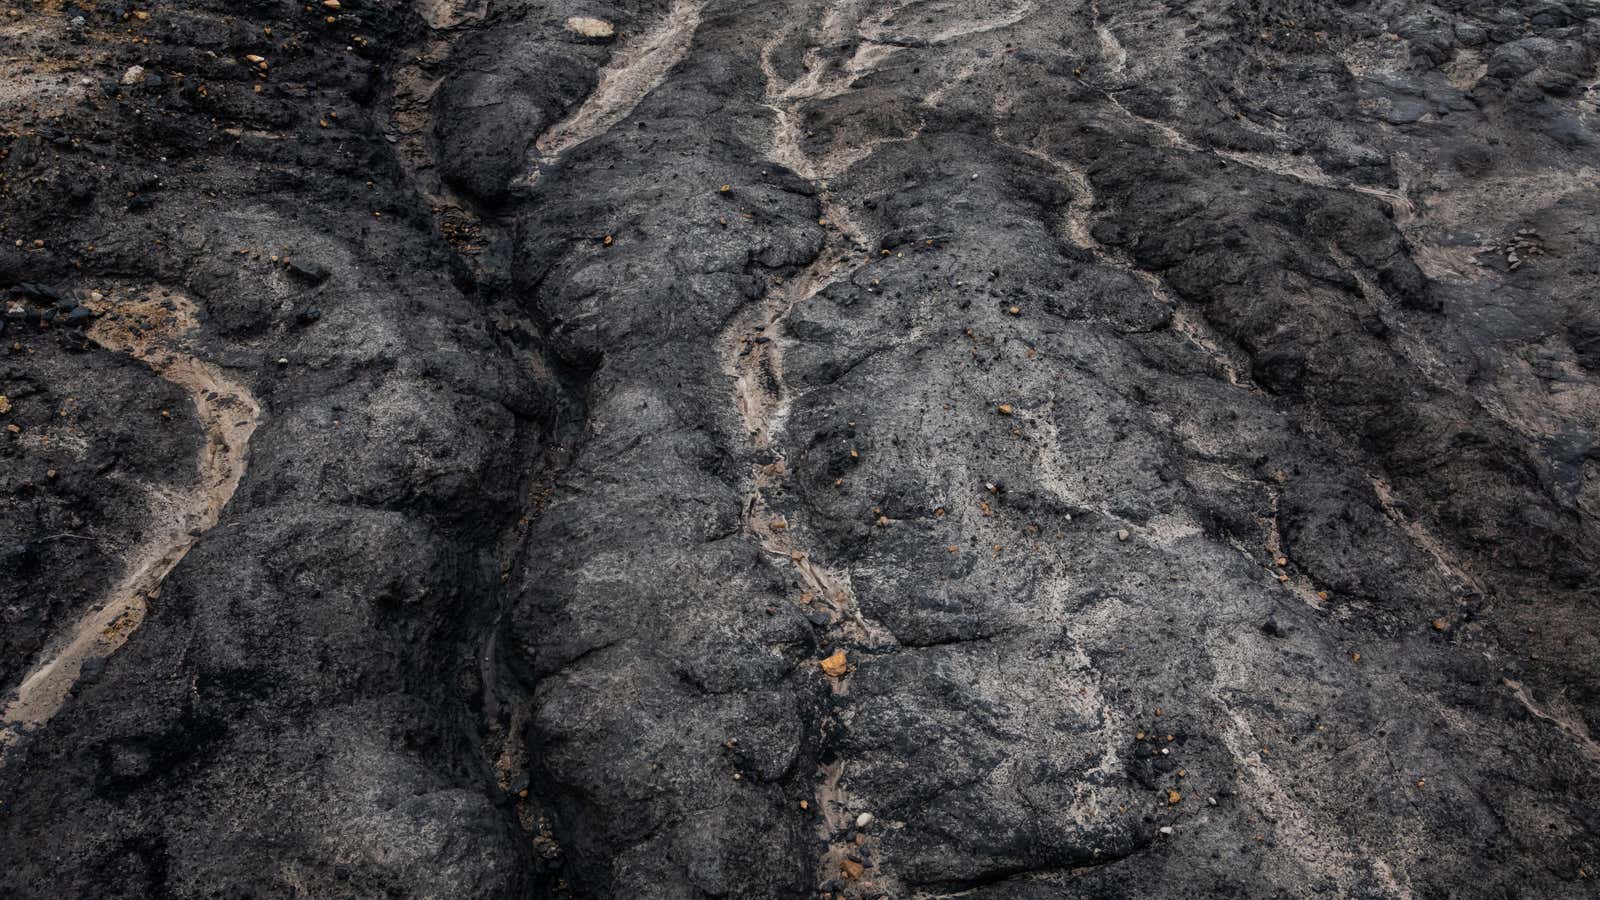 Paths traced by water on the surface of a coal mine.